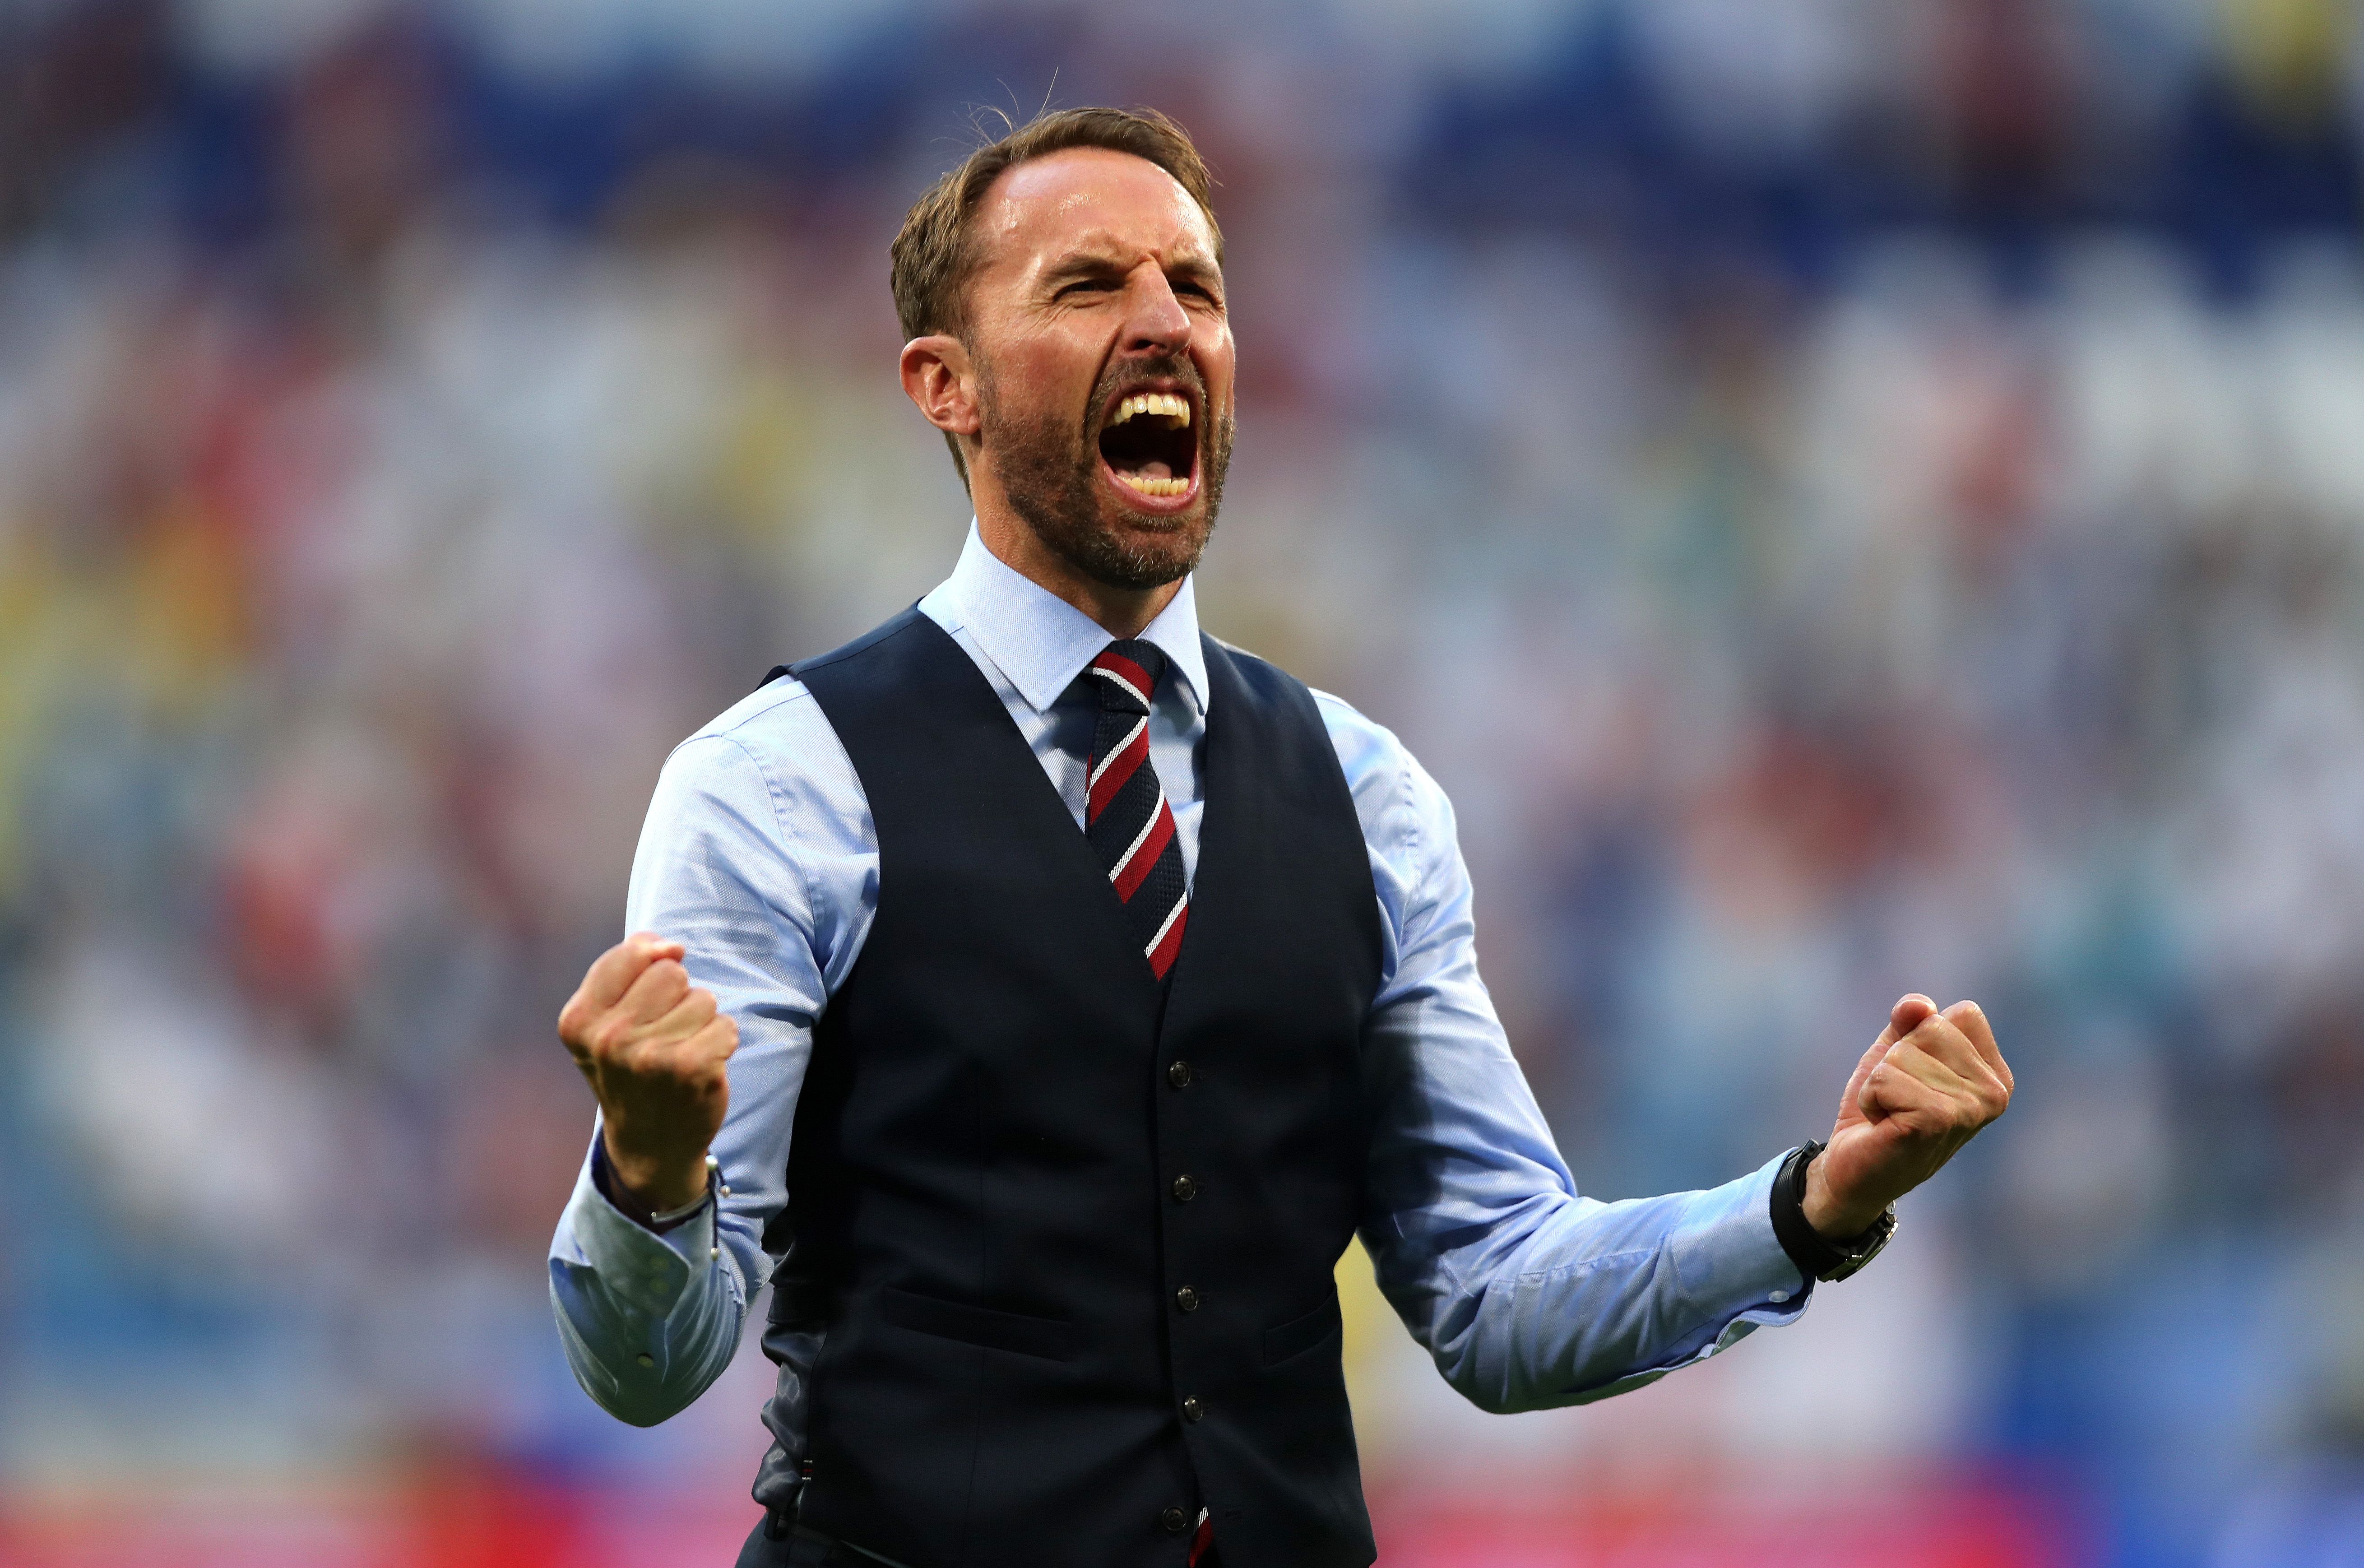 Southgate celebrates at the 2018 World Cup